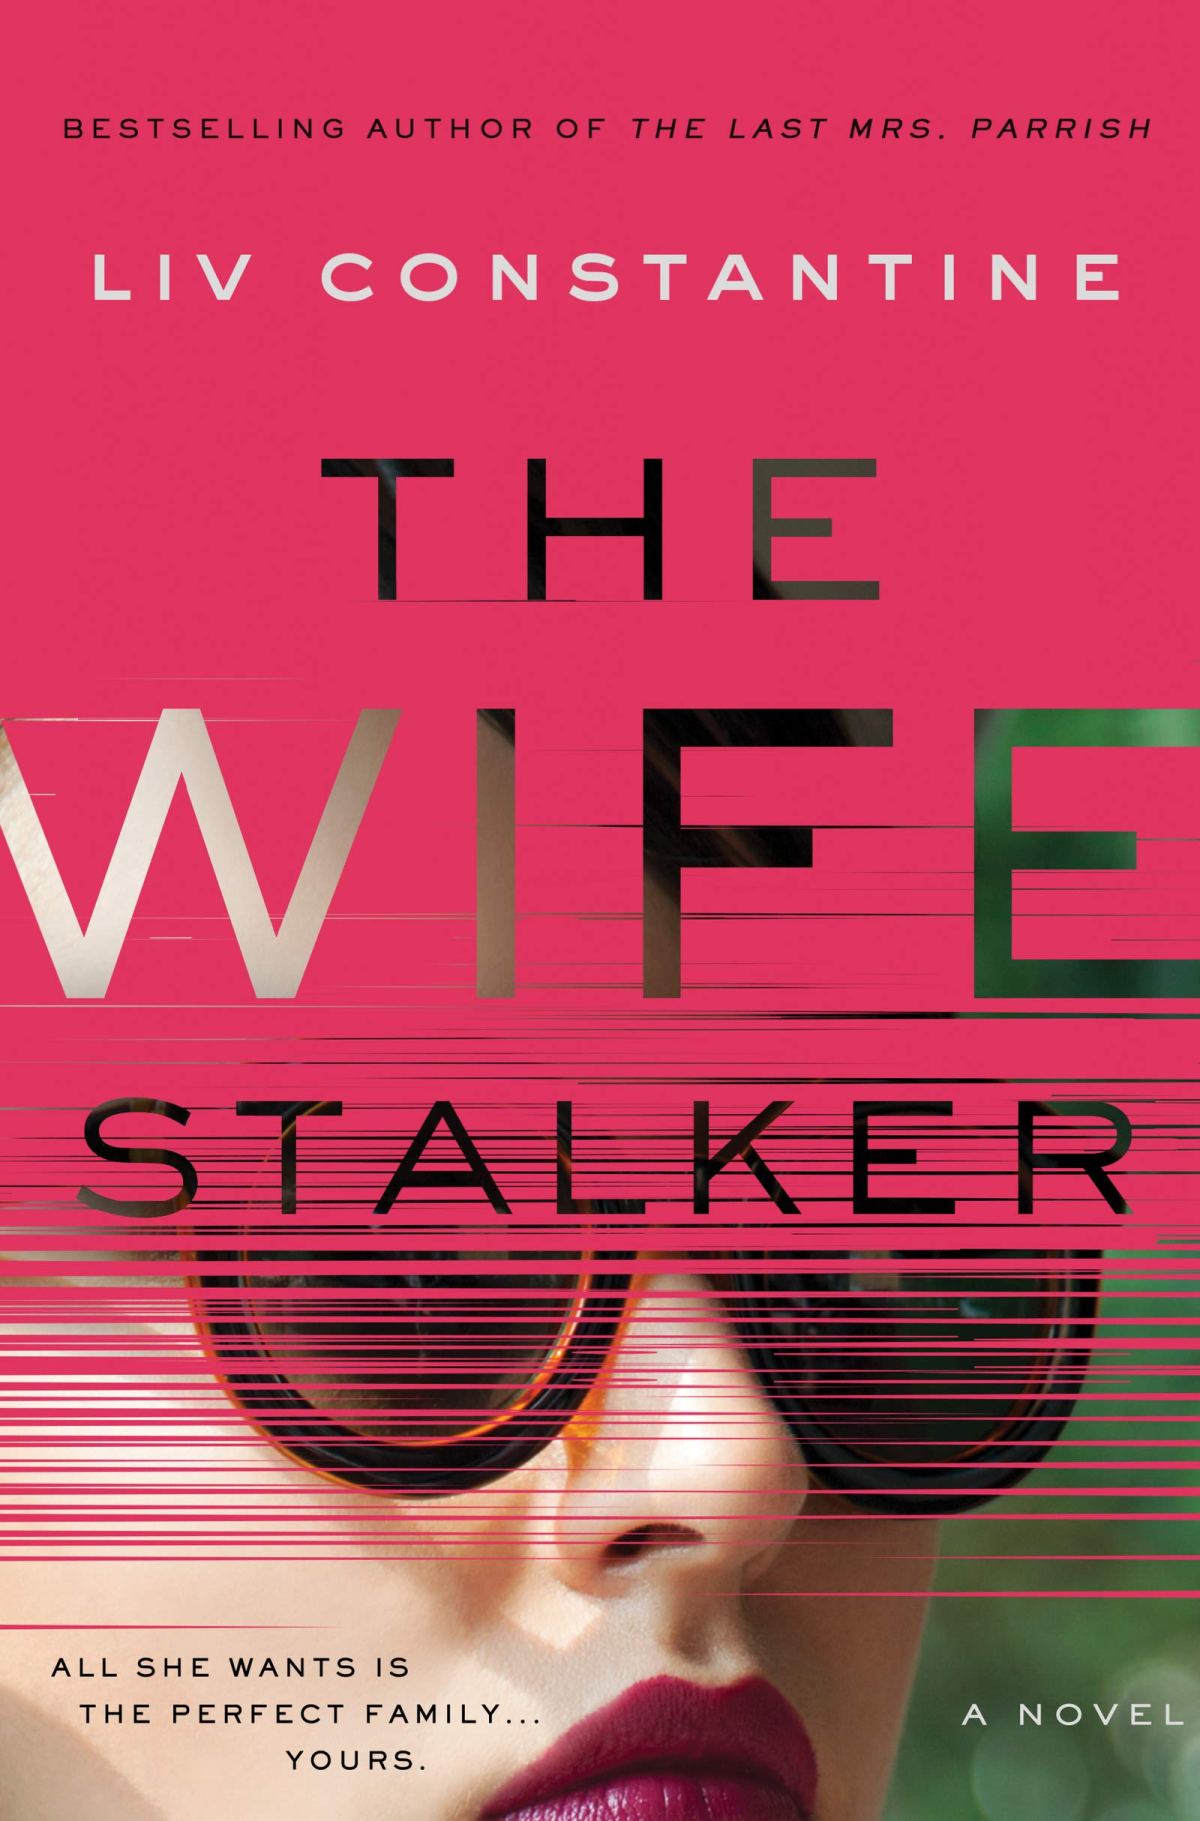 Book 14 – The Wife Stalker by Liv Constantine